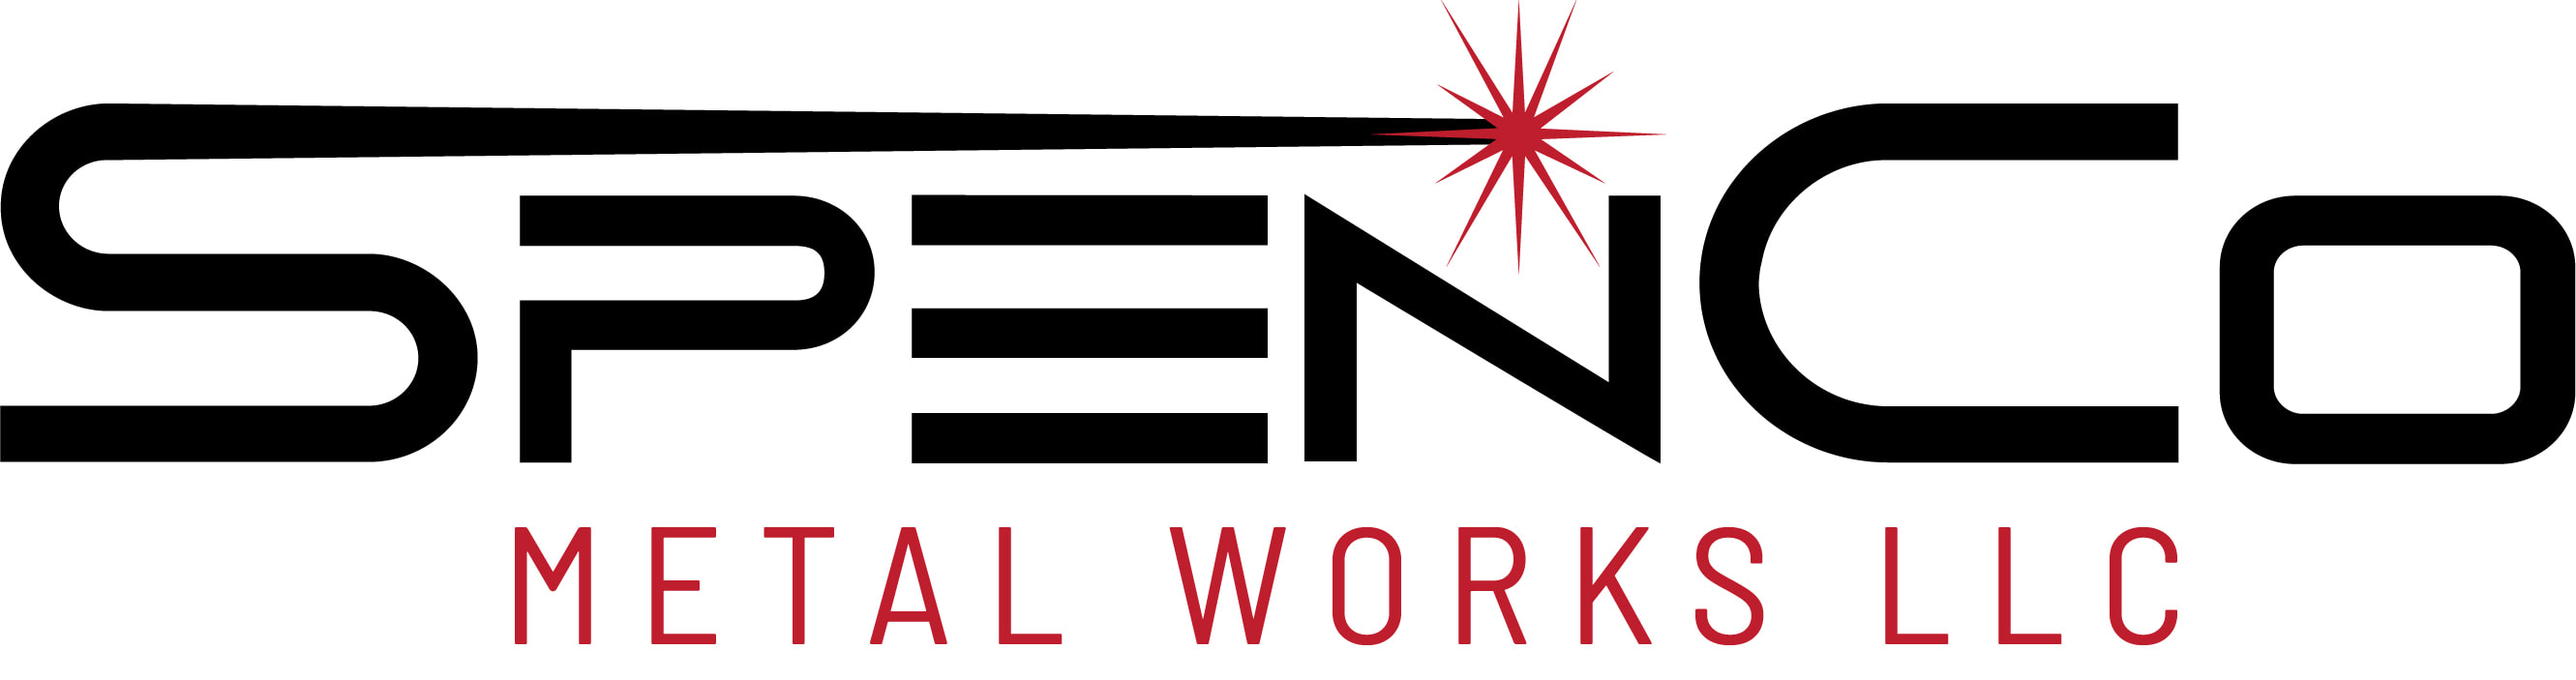 SpenCo Metal Works logo, links to their website in a new window